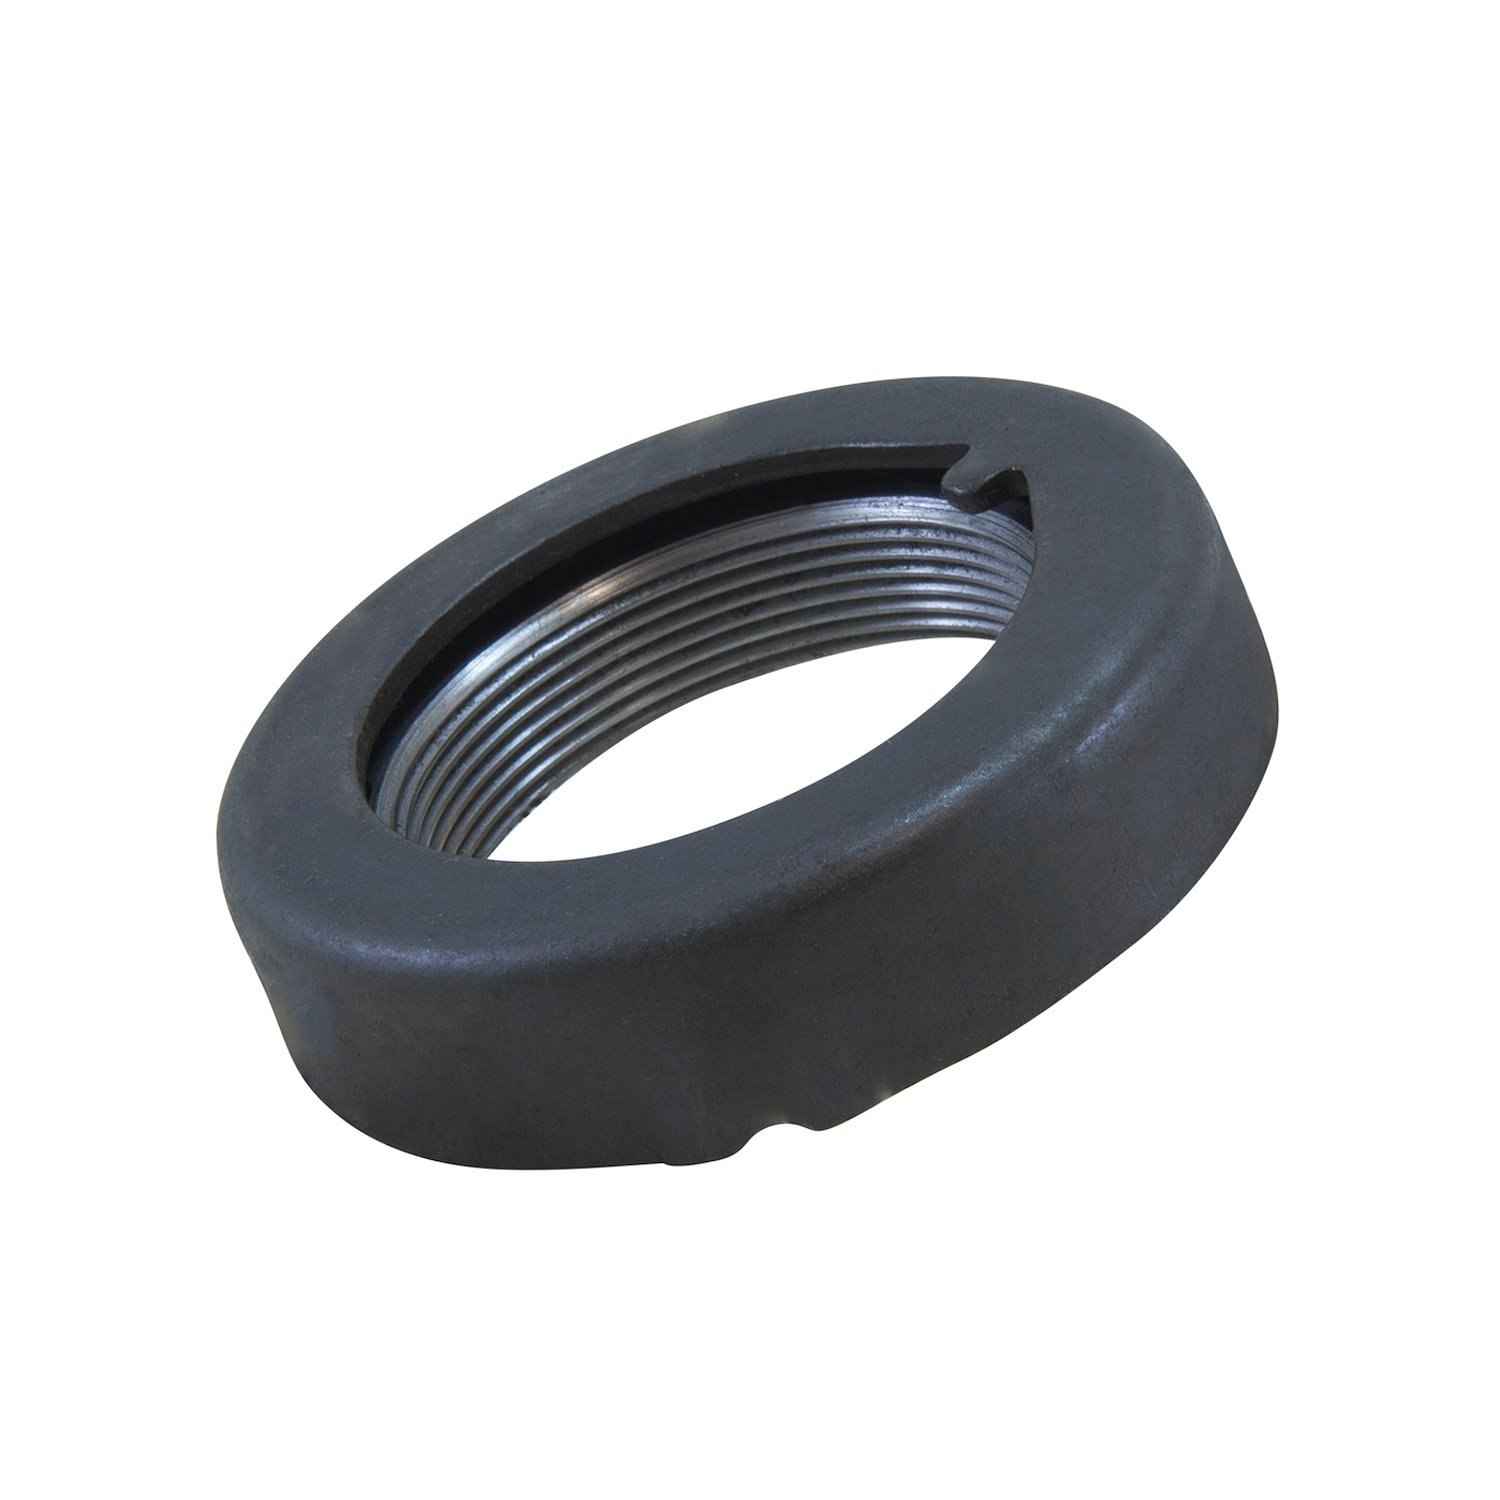 Rear Spindle Nut For Ford 10.25 in., D60, D70, D80 Ratcheting Design.